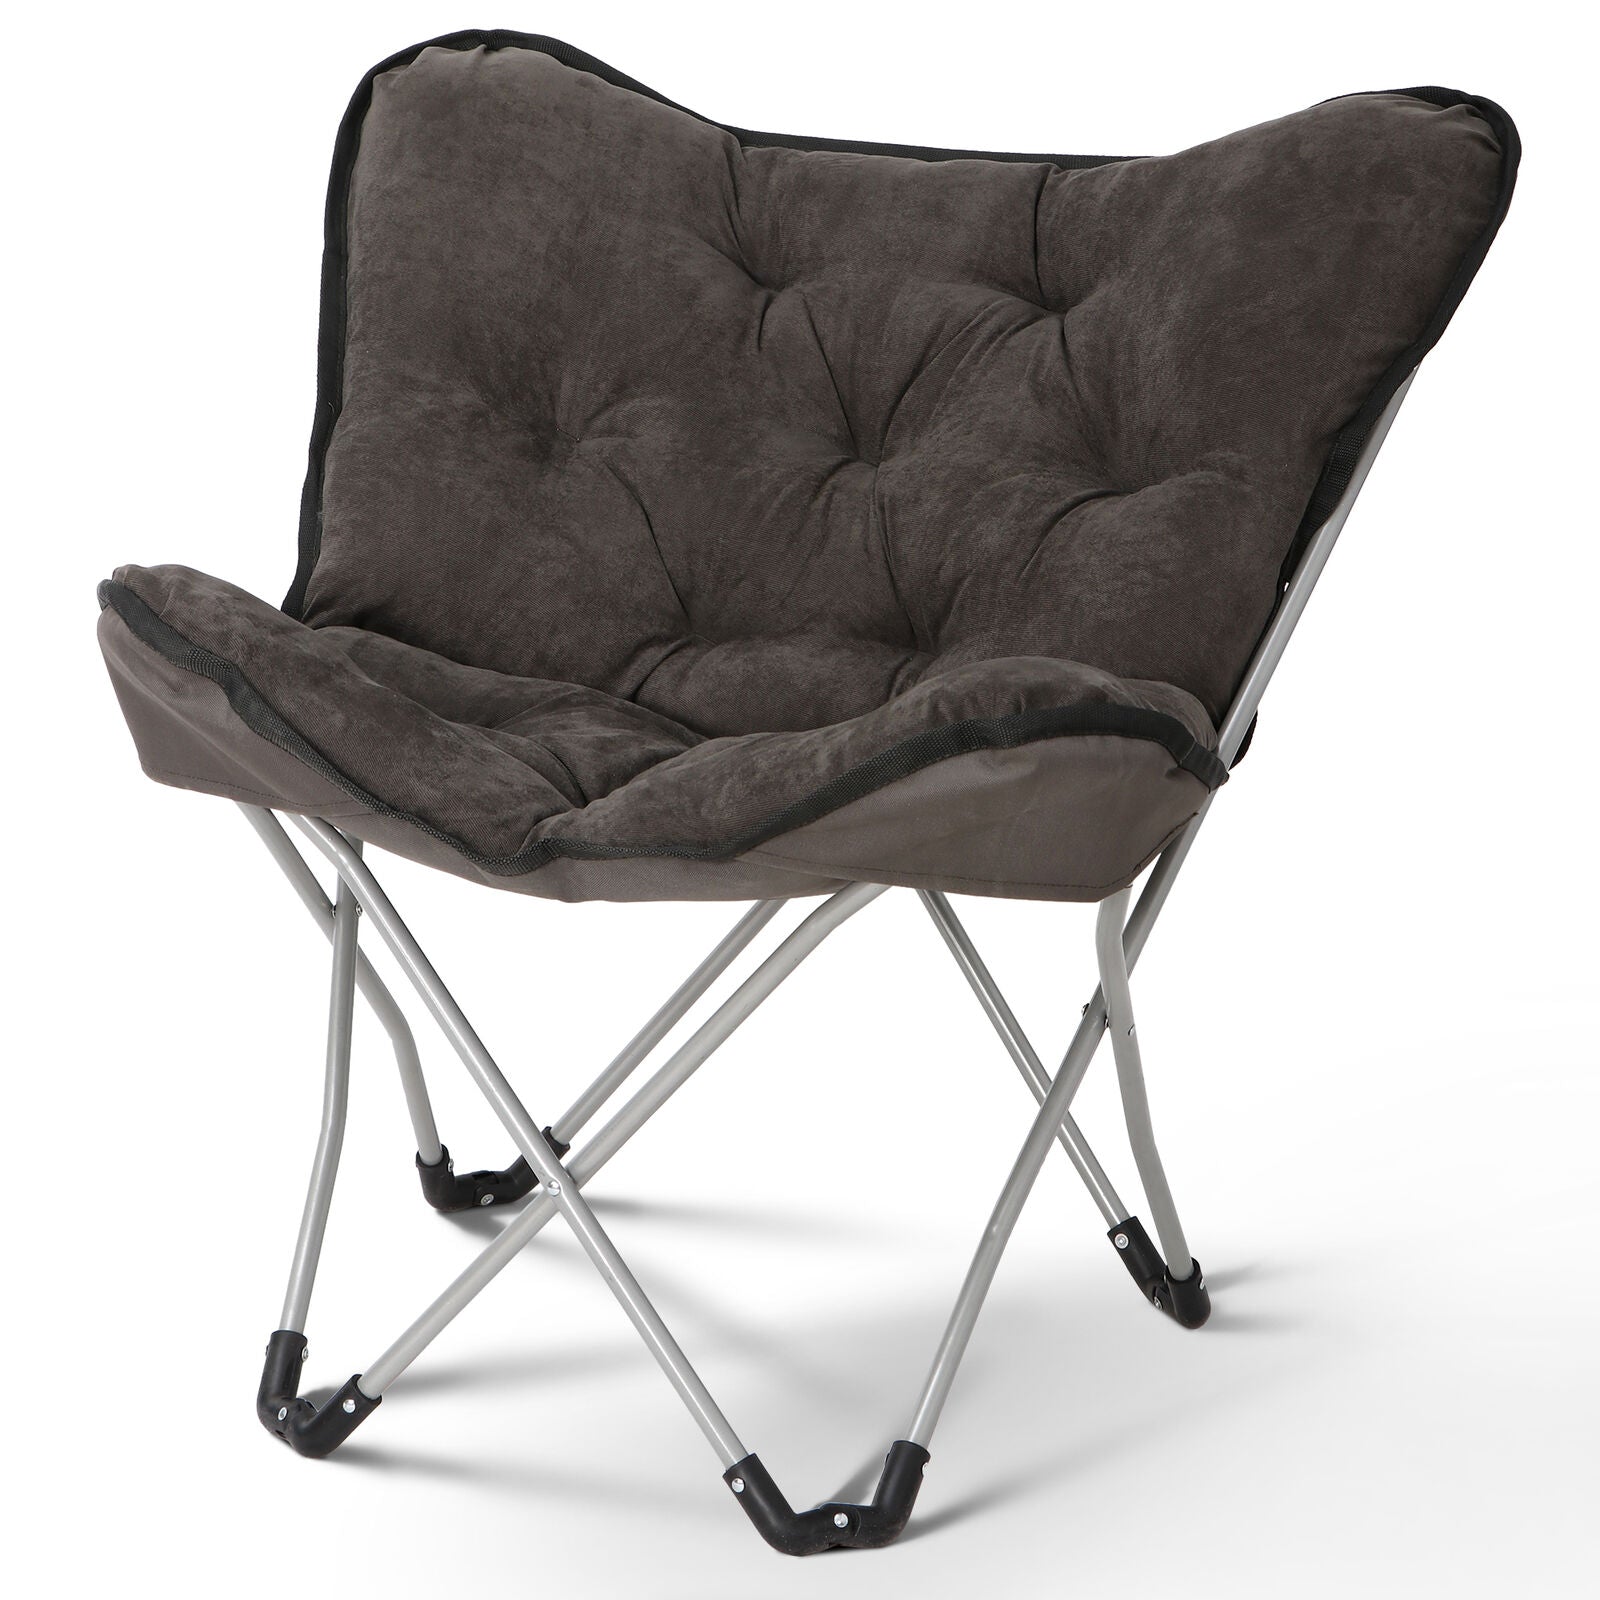 Foldable Butterfly Chair Square Lounge Soft Seat Living Room Furniture Deep Grey